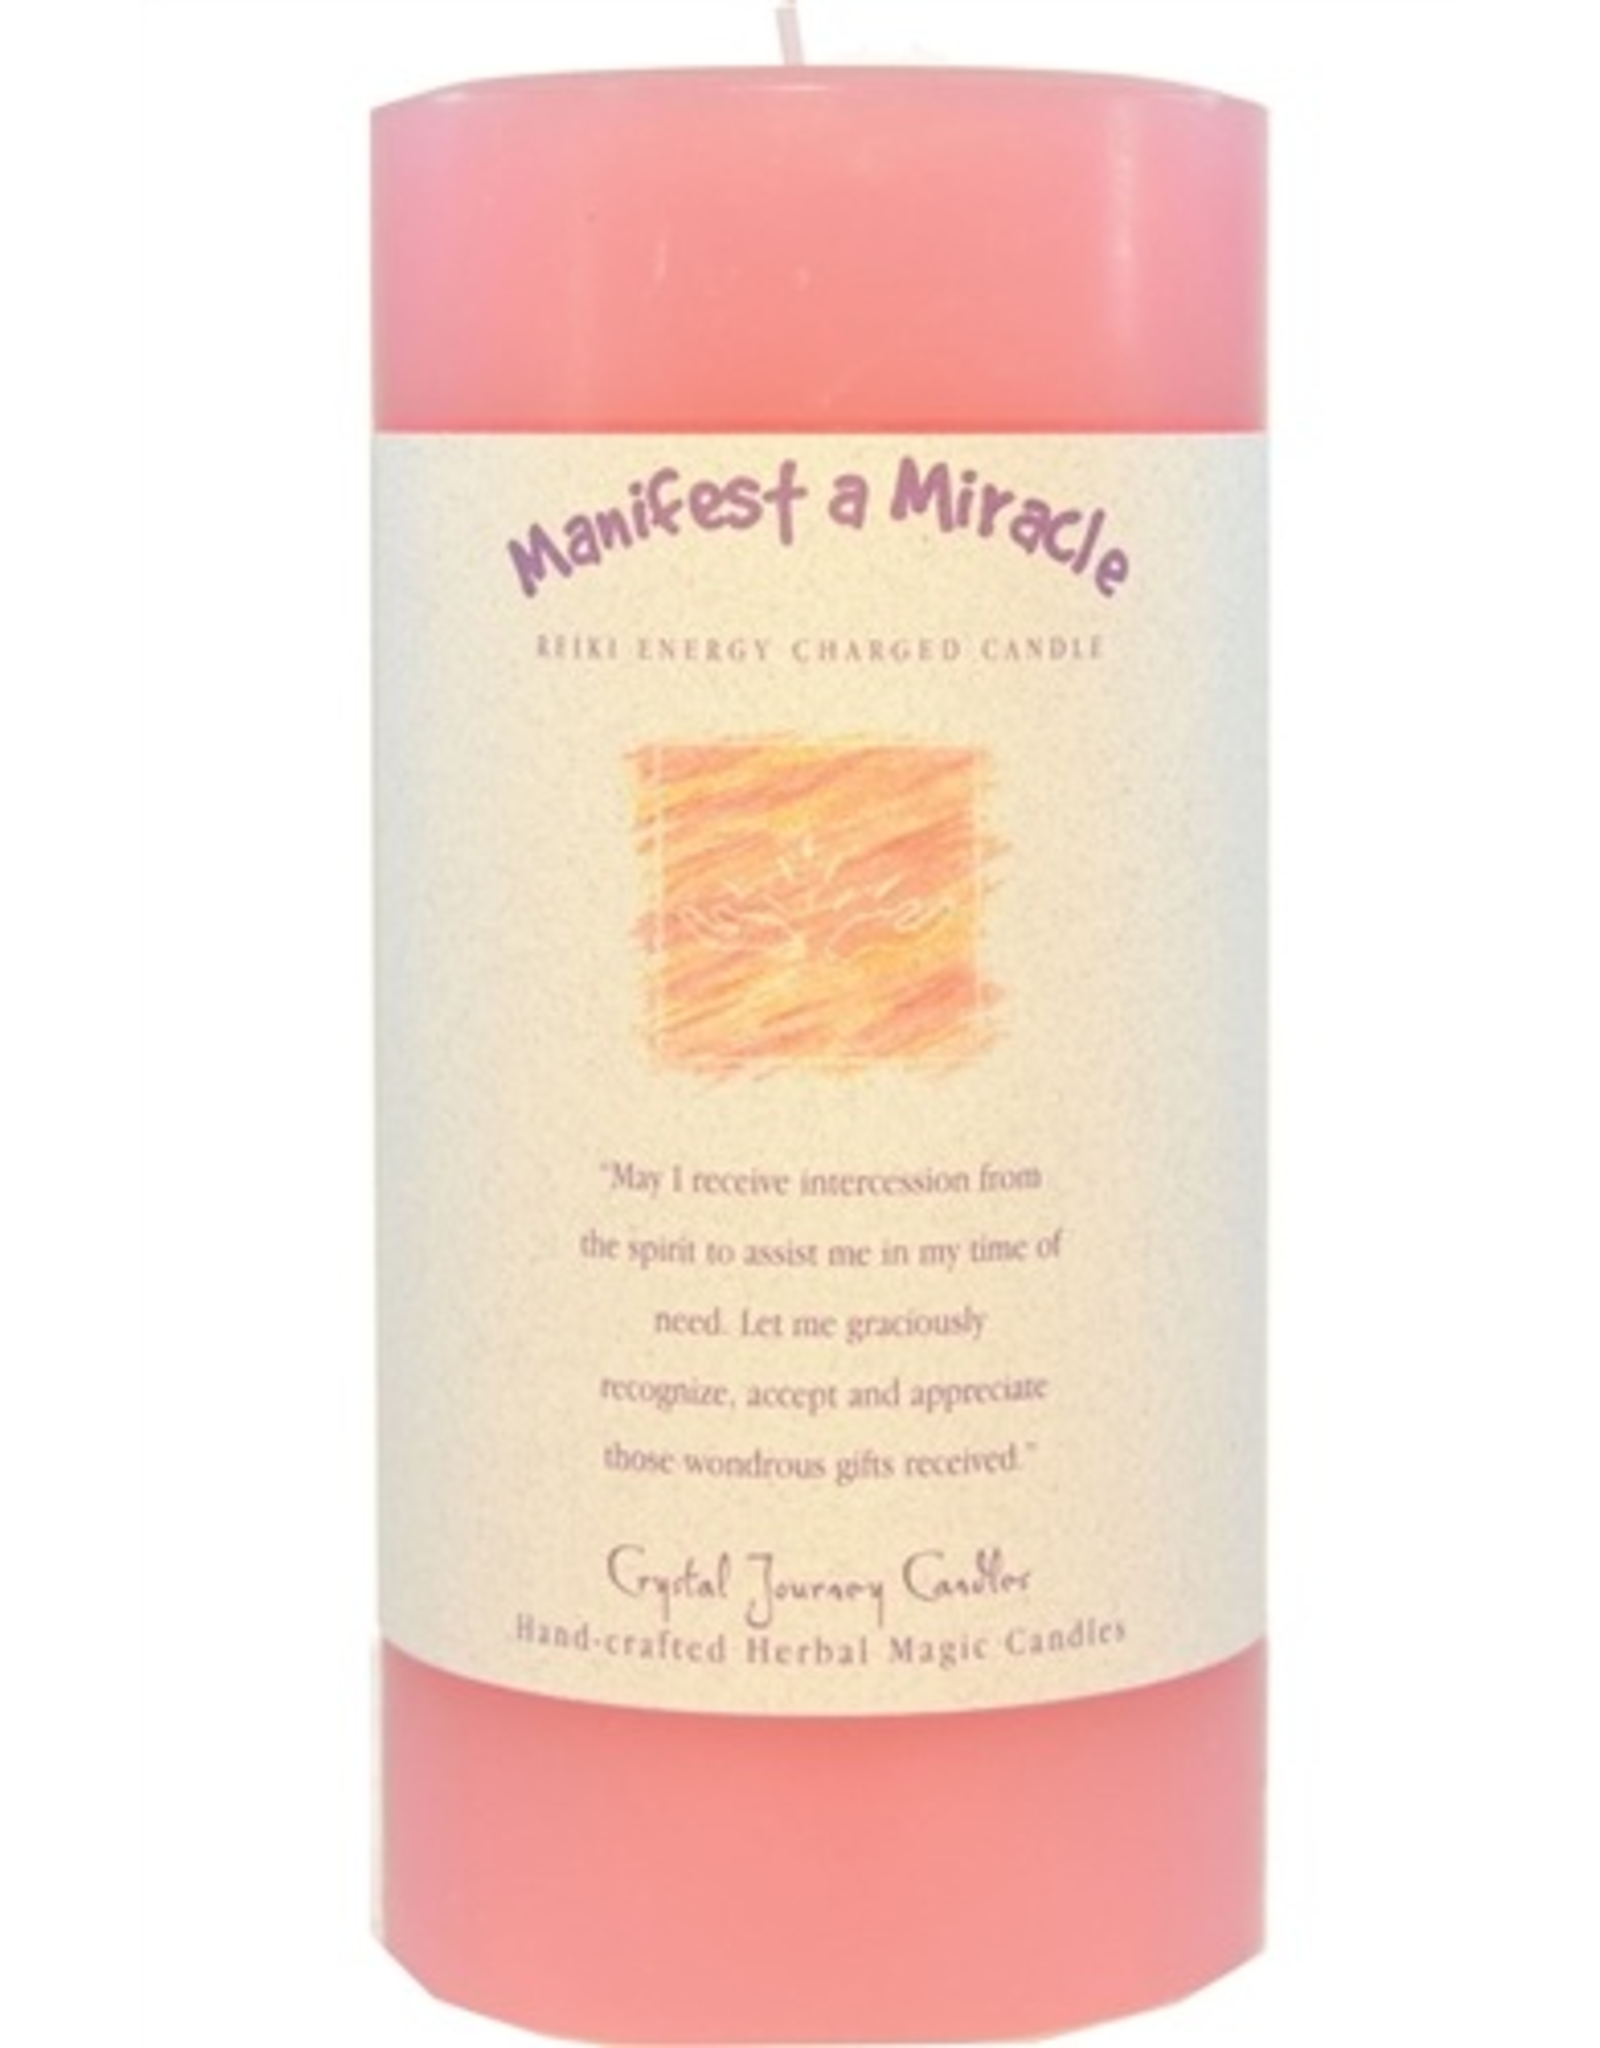 Crystal Journey Pillar 3x6 Candle-Manifest a Miracle